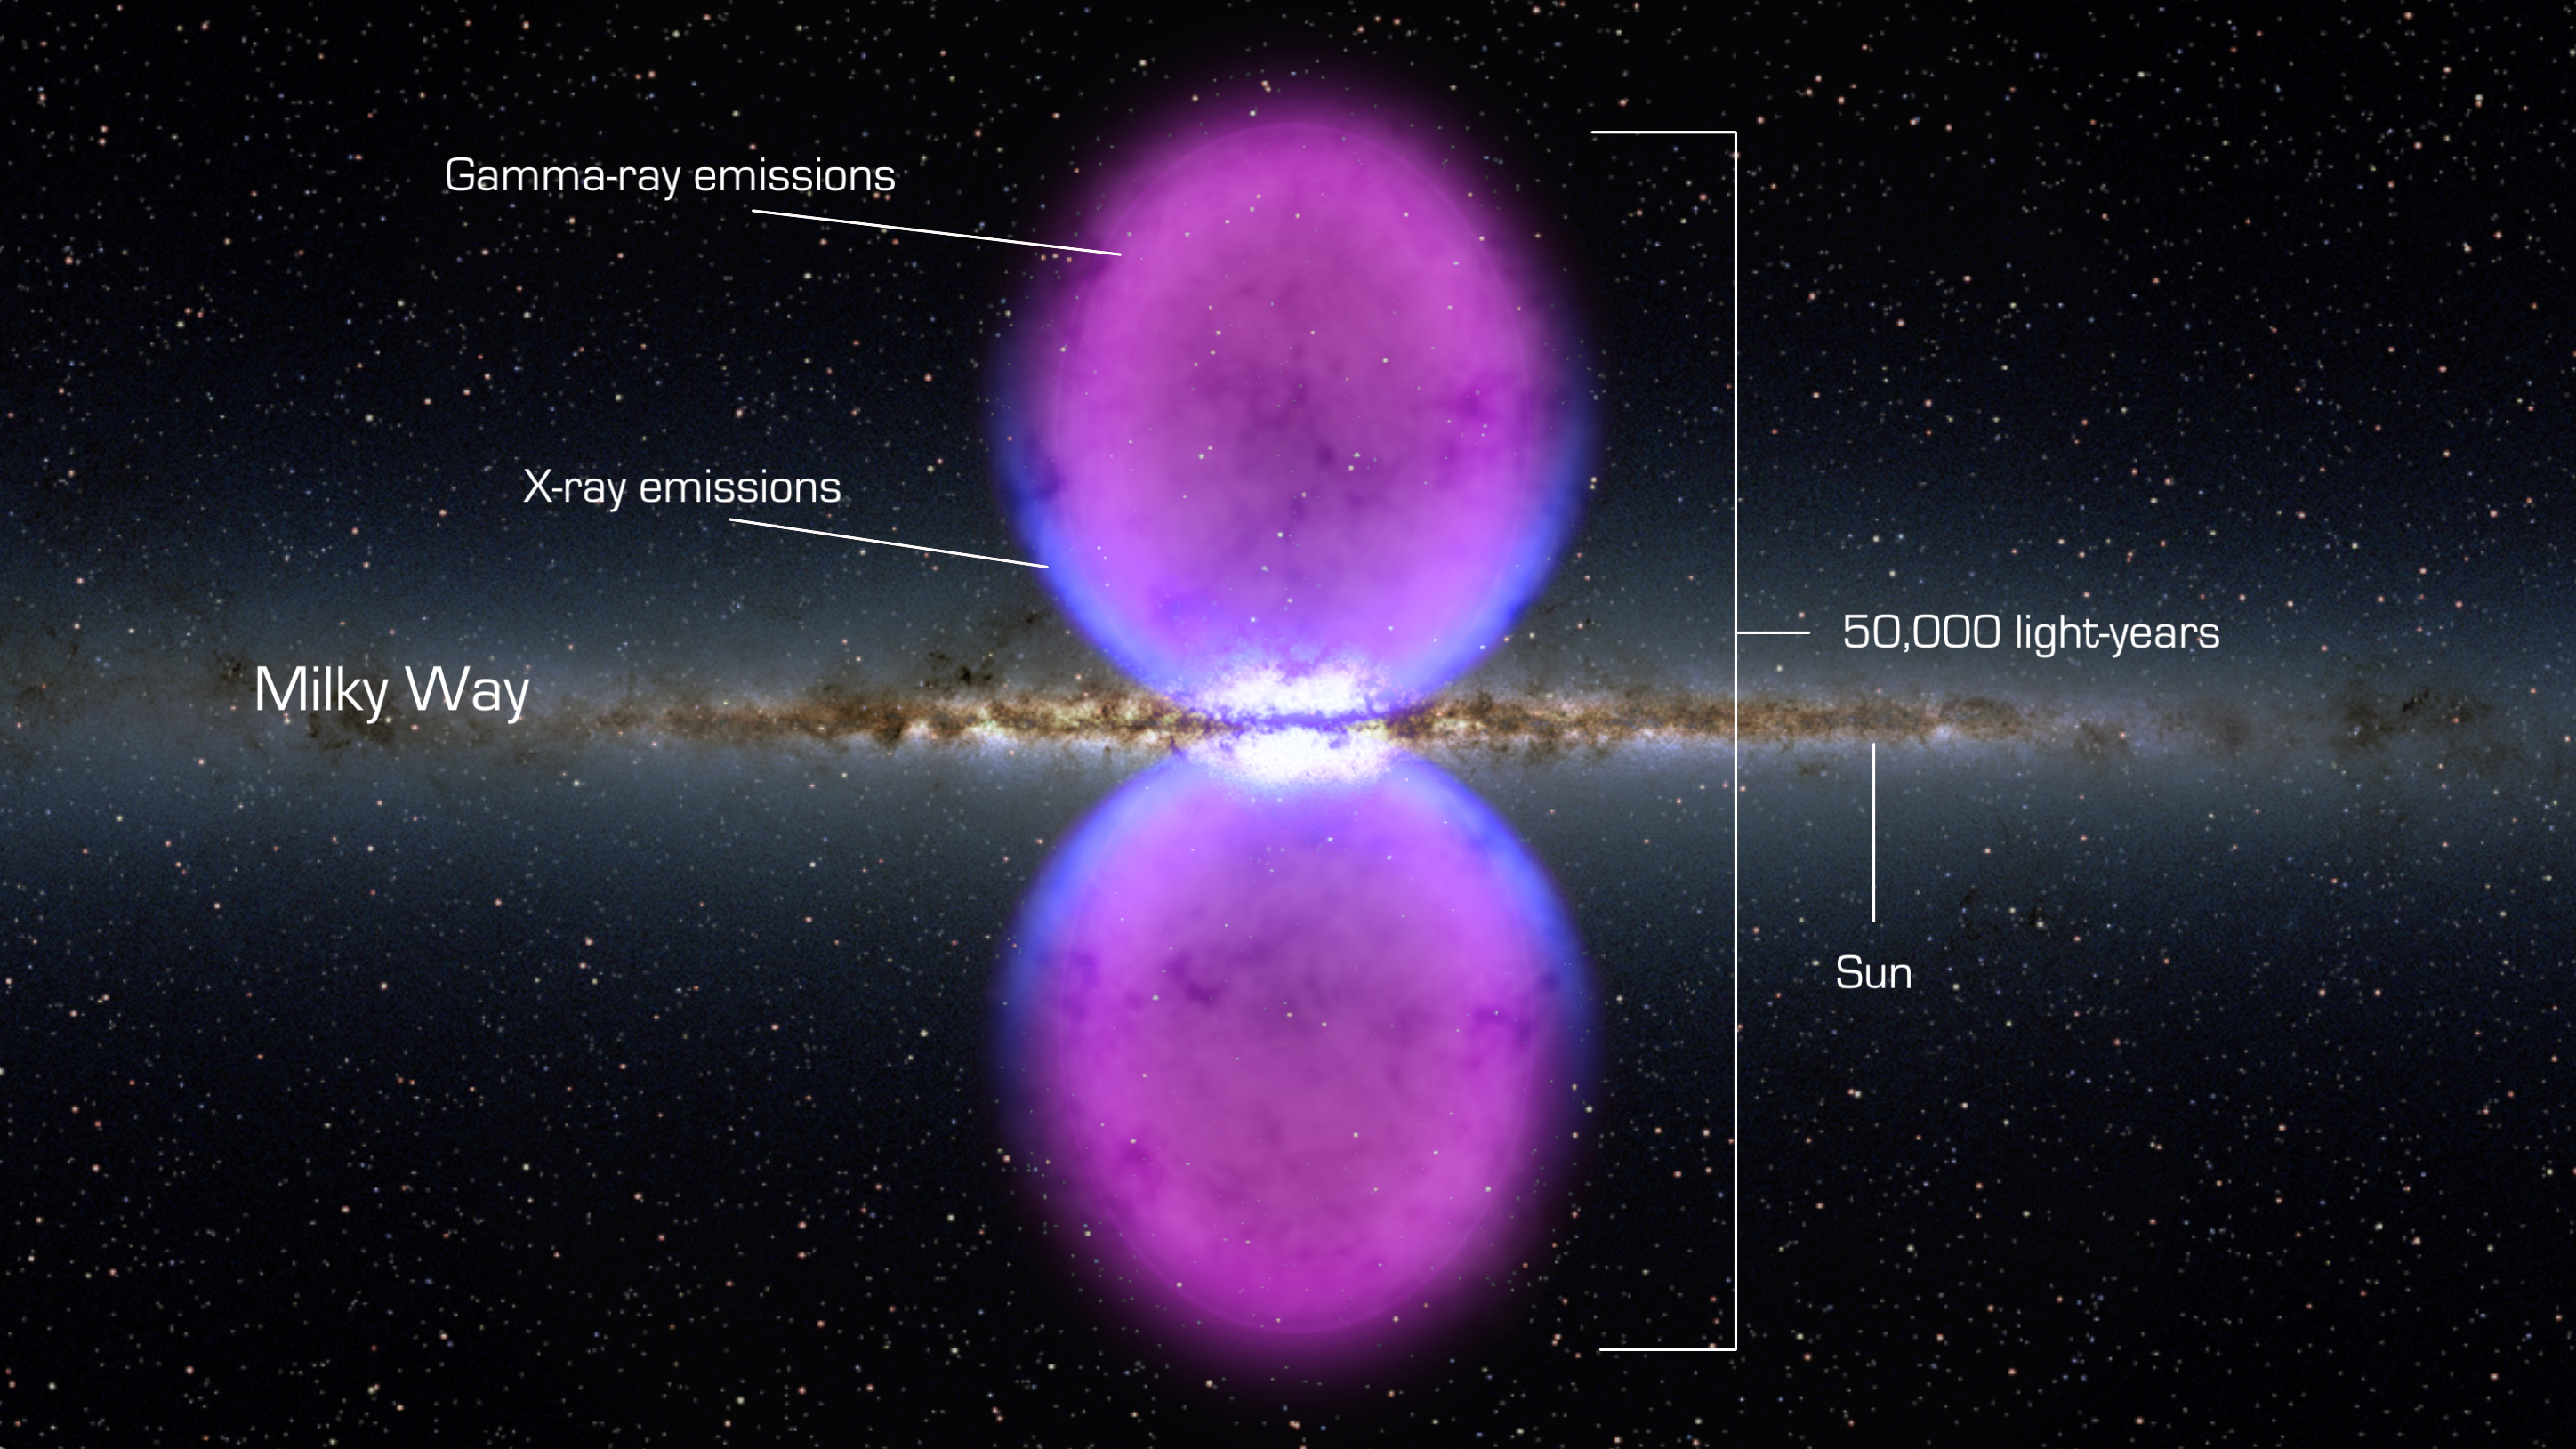 Milky Way galaxy: Our galactic home containing 100 billion planets